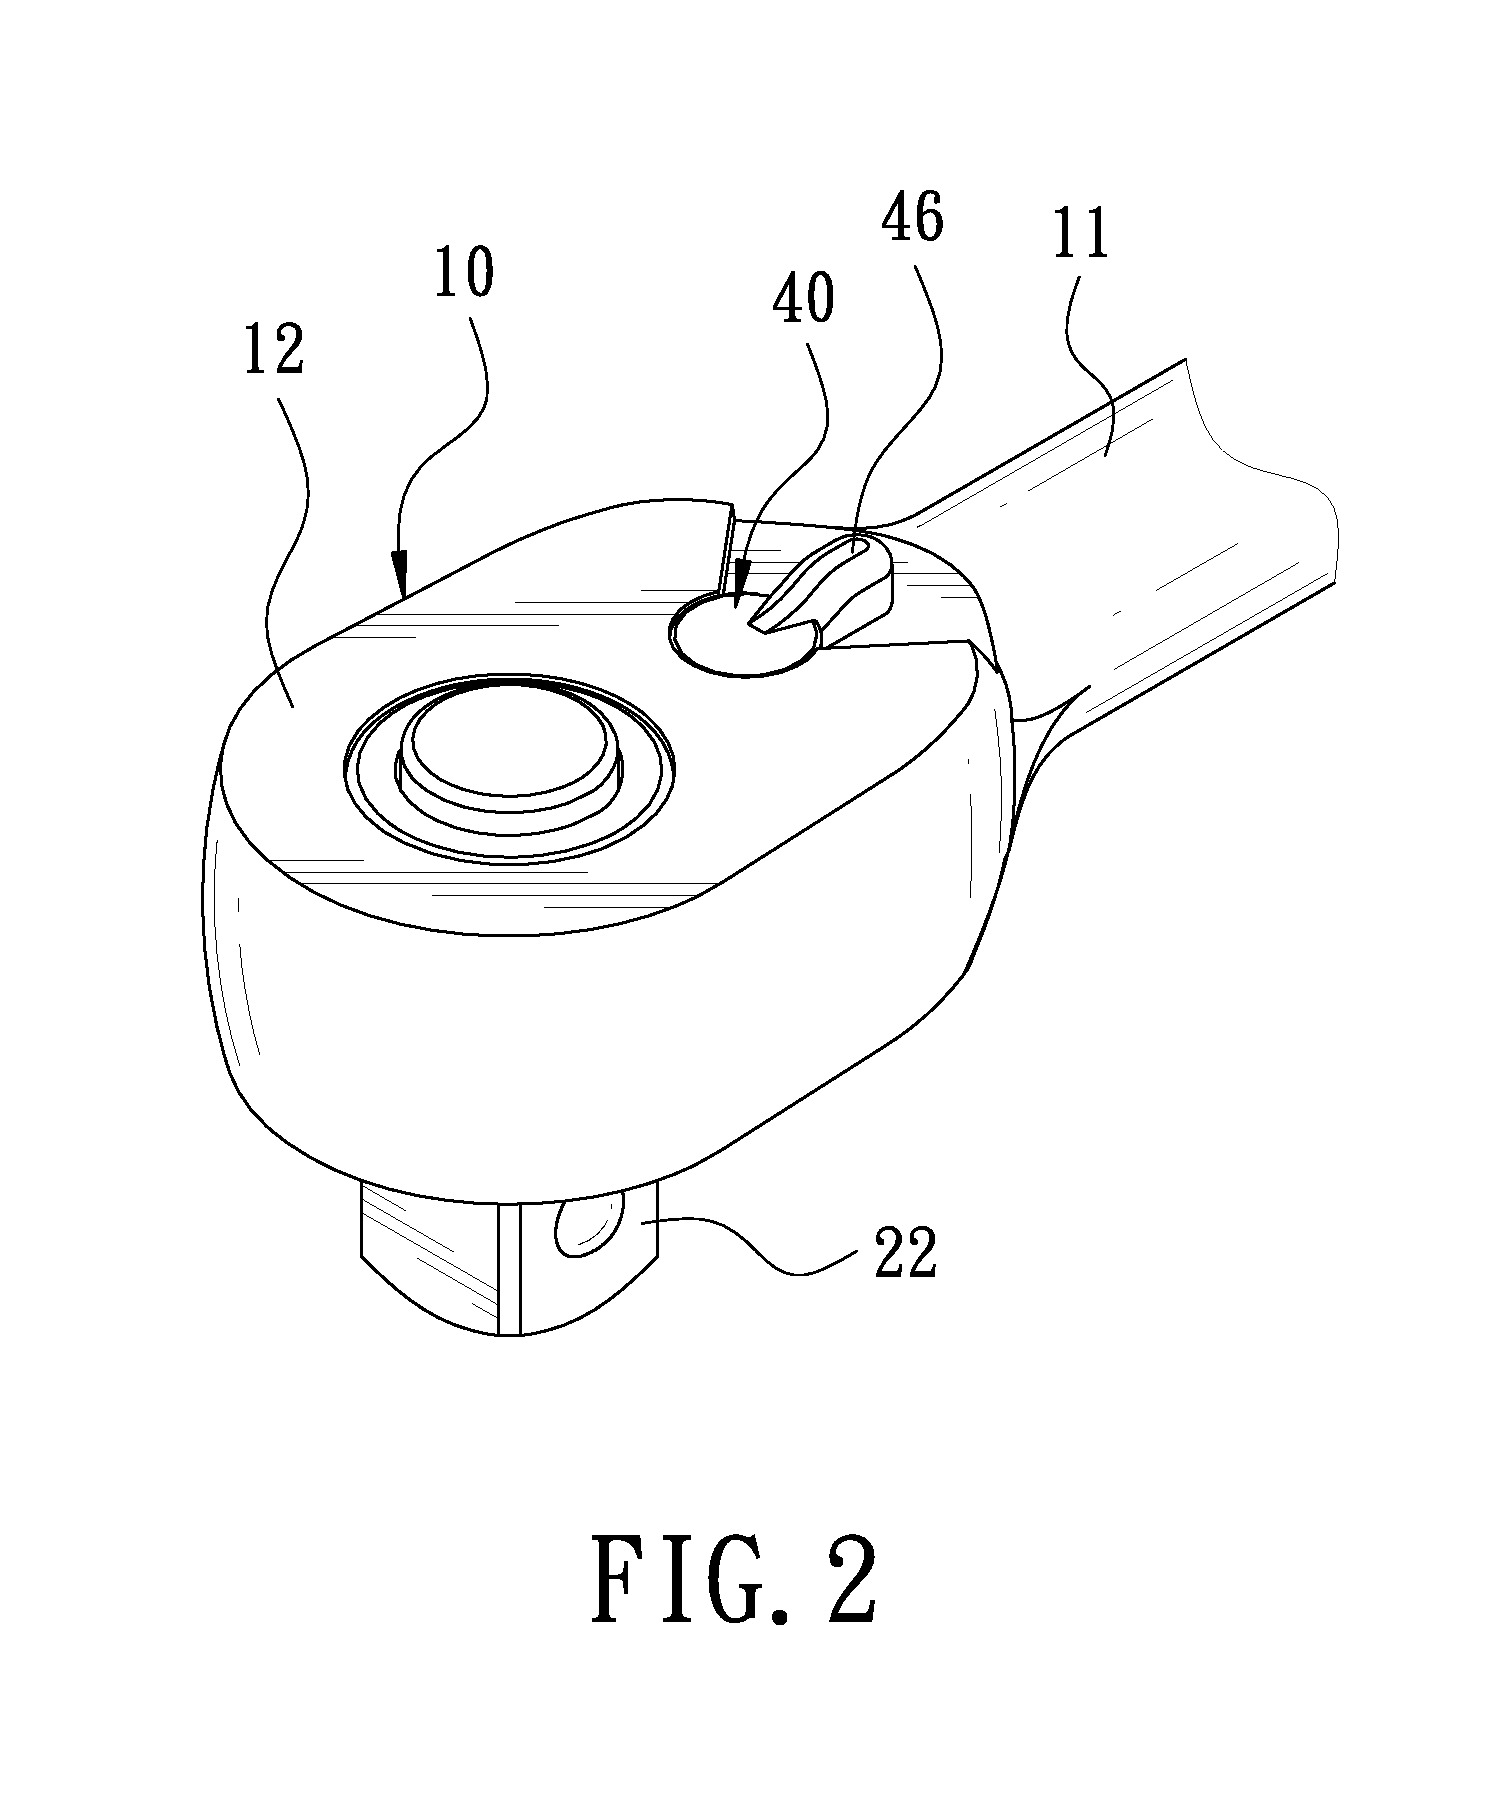 Ratchet wrench able to automatically adjust engaging tooth number according to extent of torsion